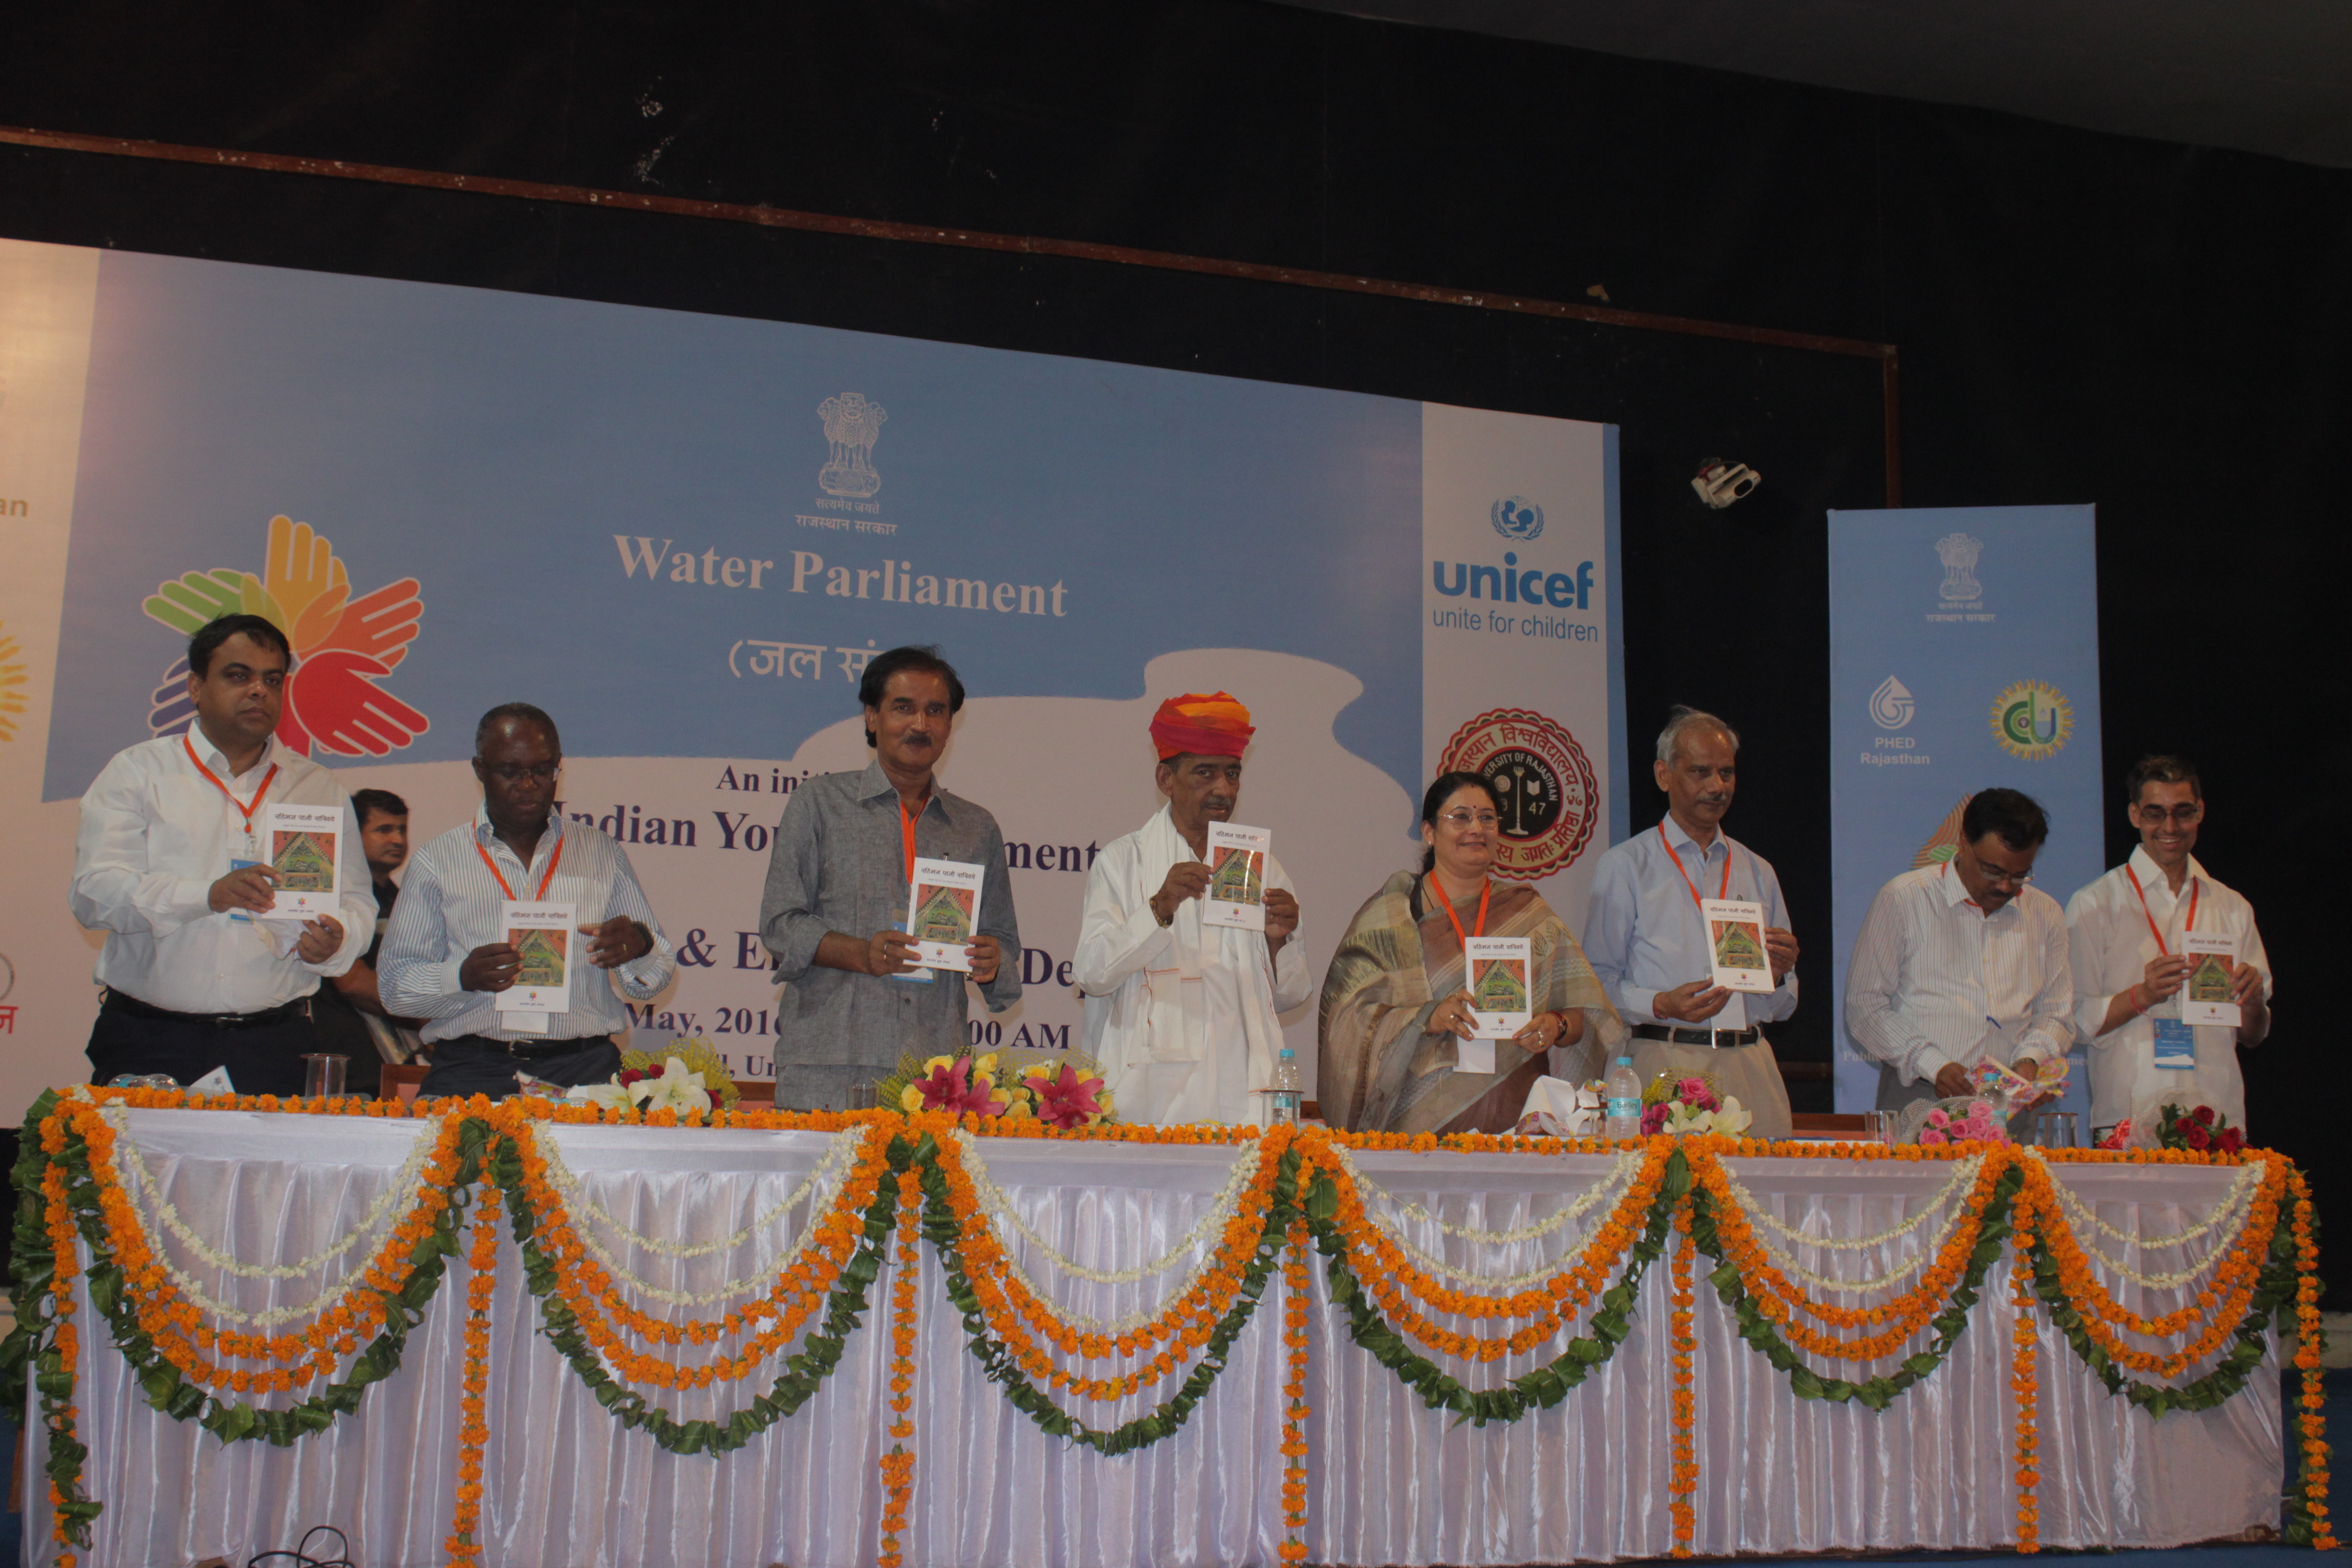 Water Parliament A Unique Concept to Attach Youth to Save water.- Ashutosh Joshi Founder Convenor  Indian Youth Parliament  (An Initative by Med...